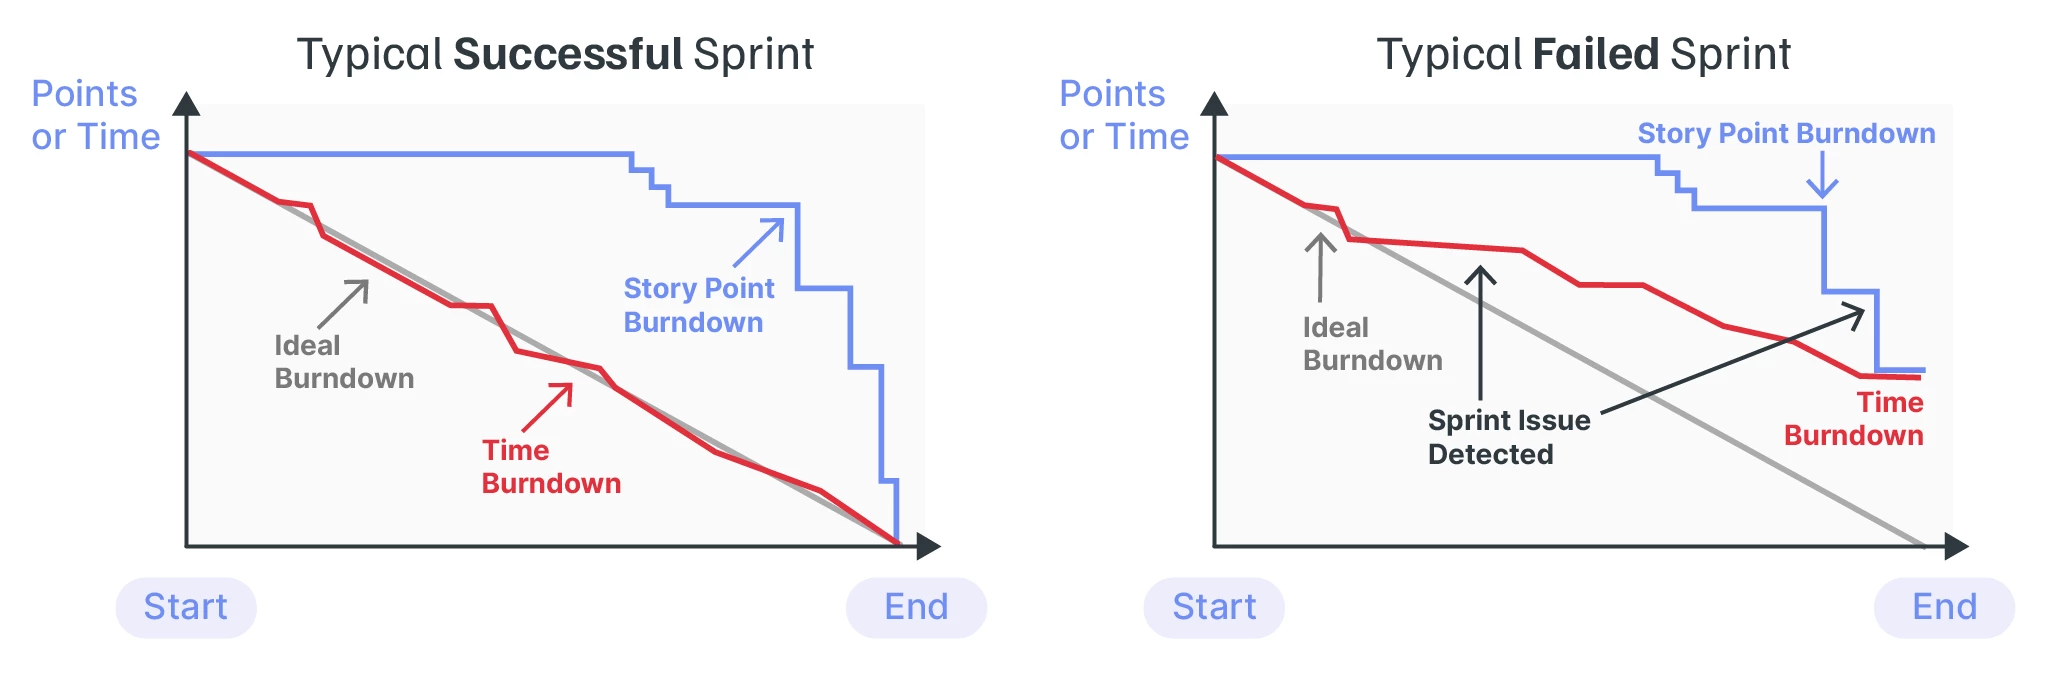 Typical Sprint.